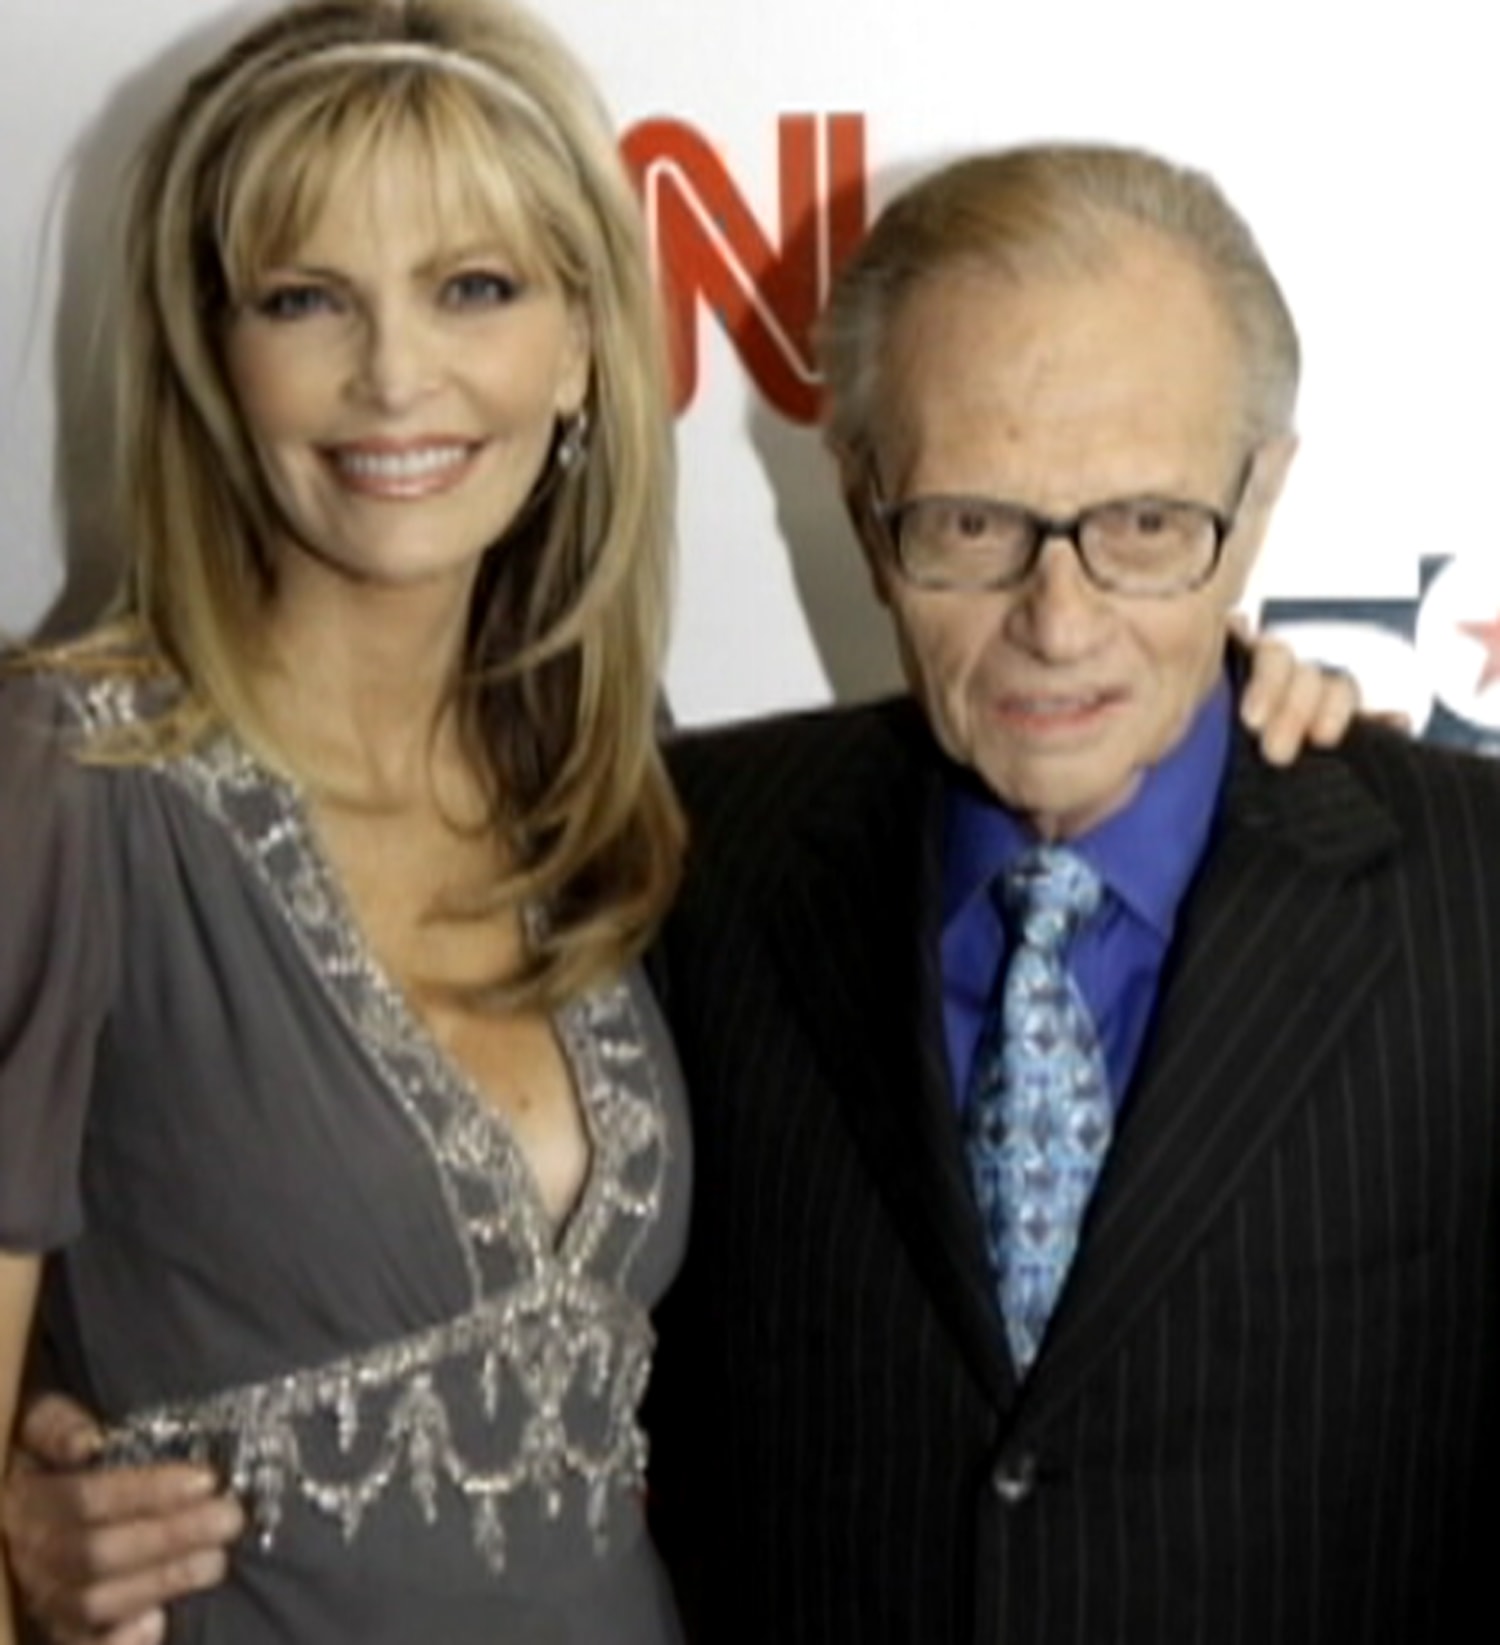 Did Larry King cheat on wife with her